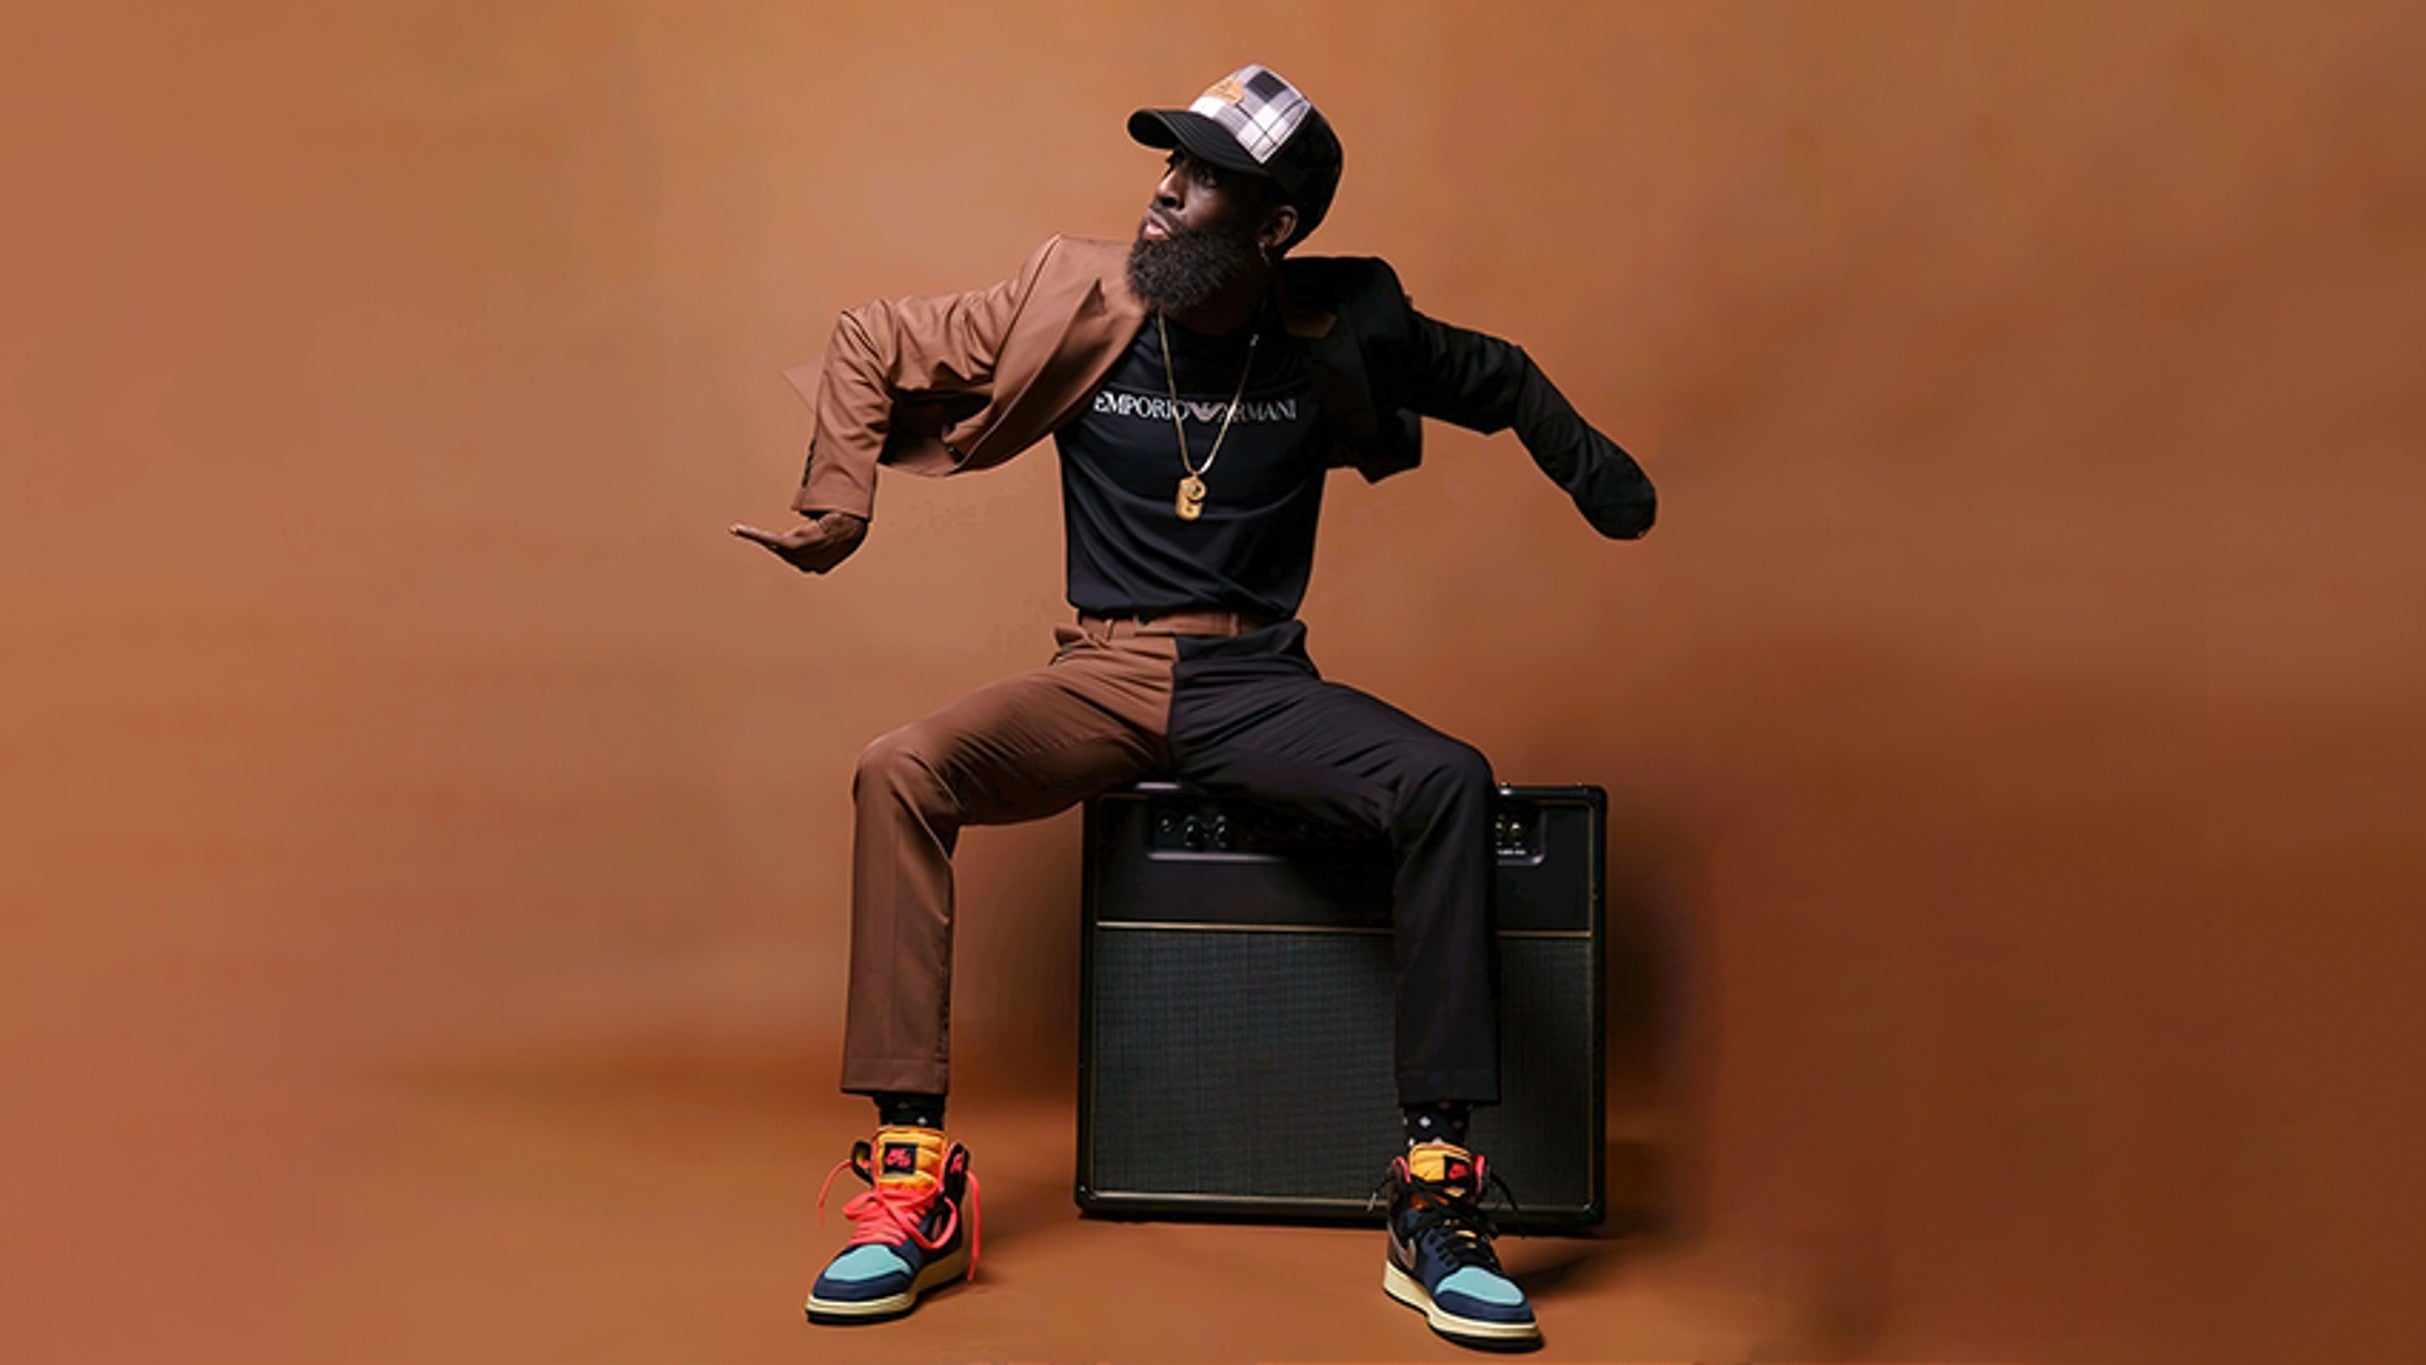 Tye Tribbett - All Things New Tour in Washington promo photo for Live Nation presale offer code